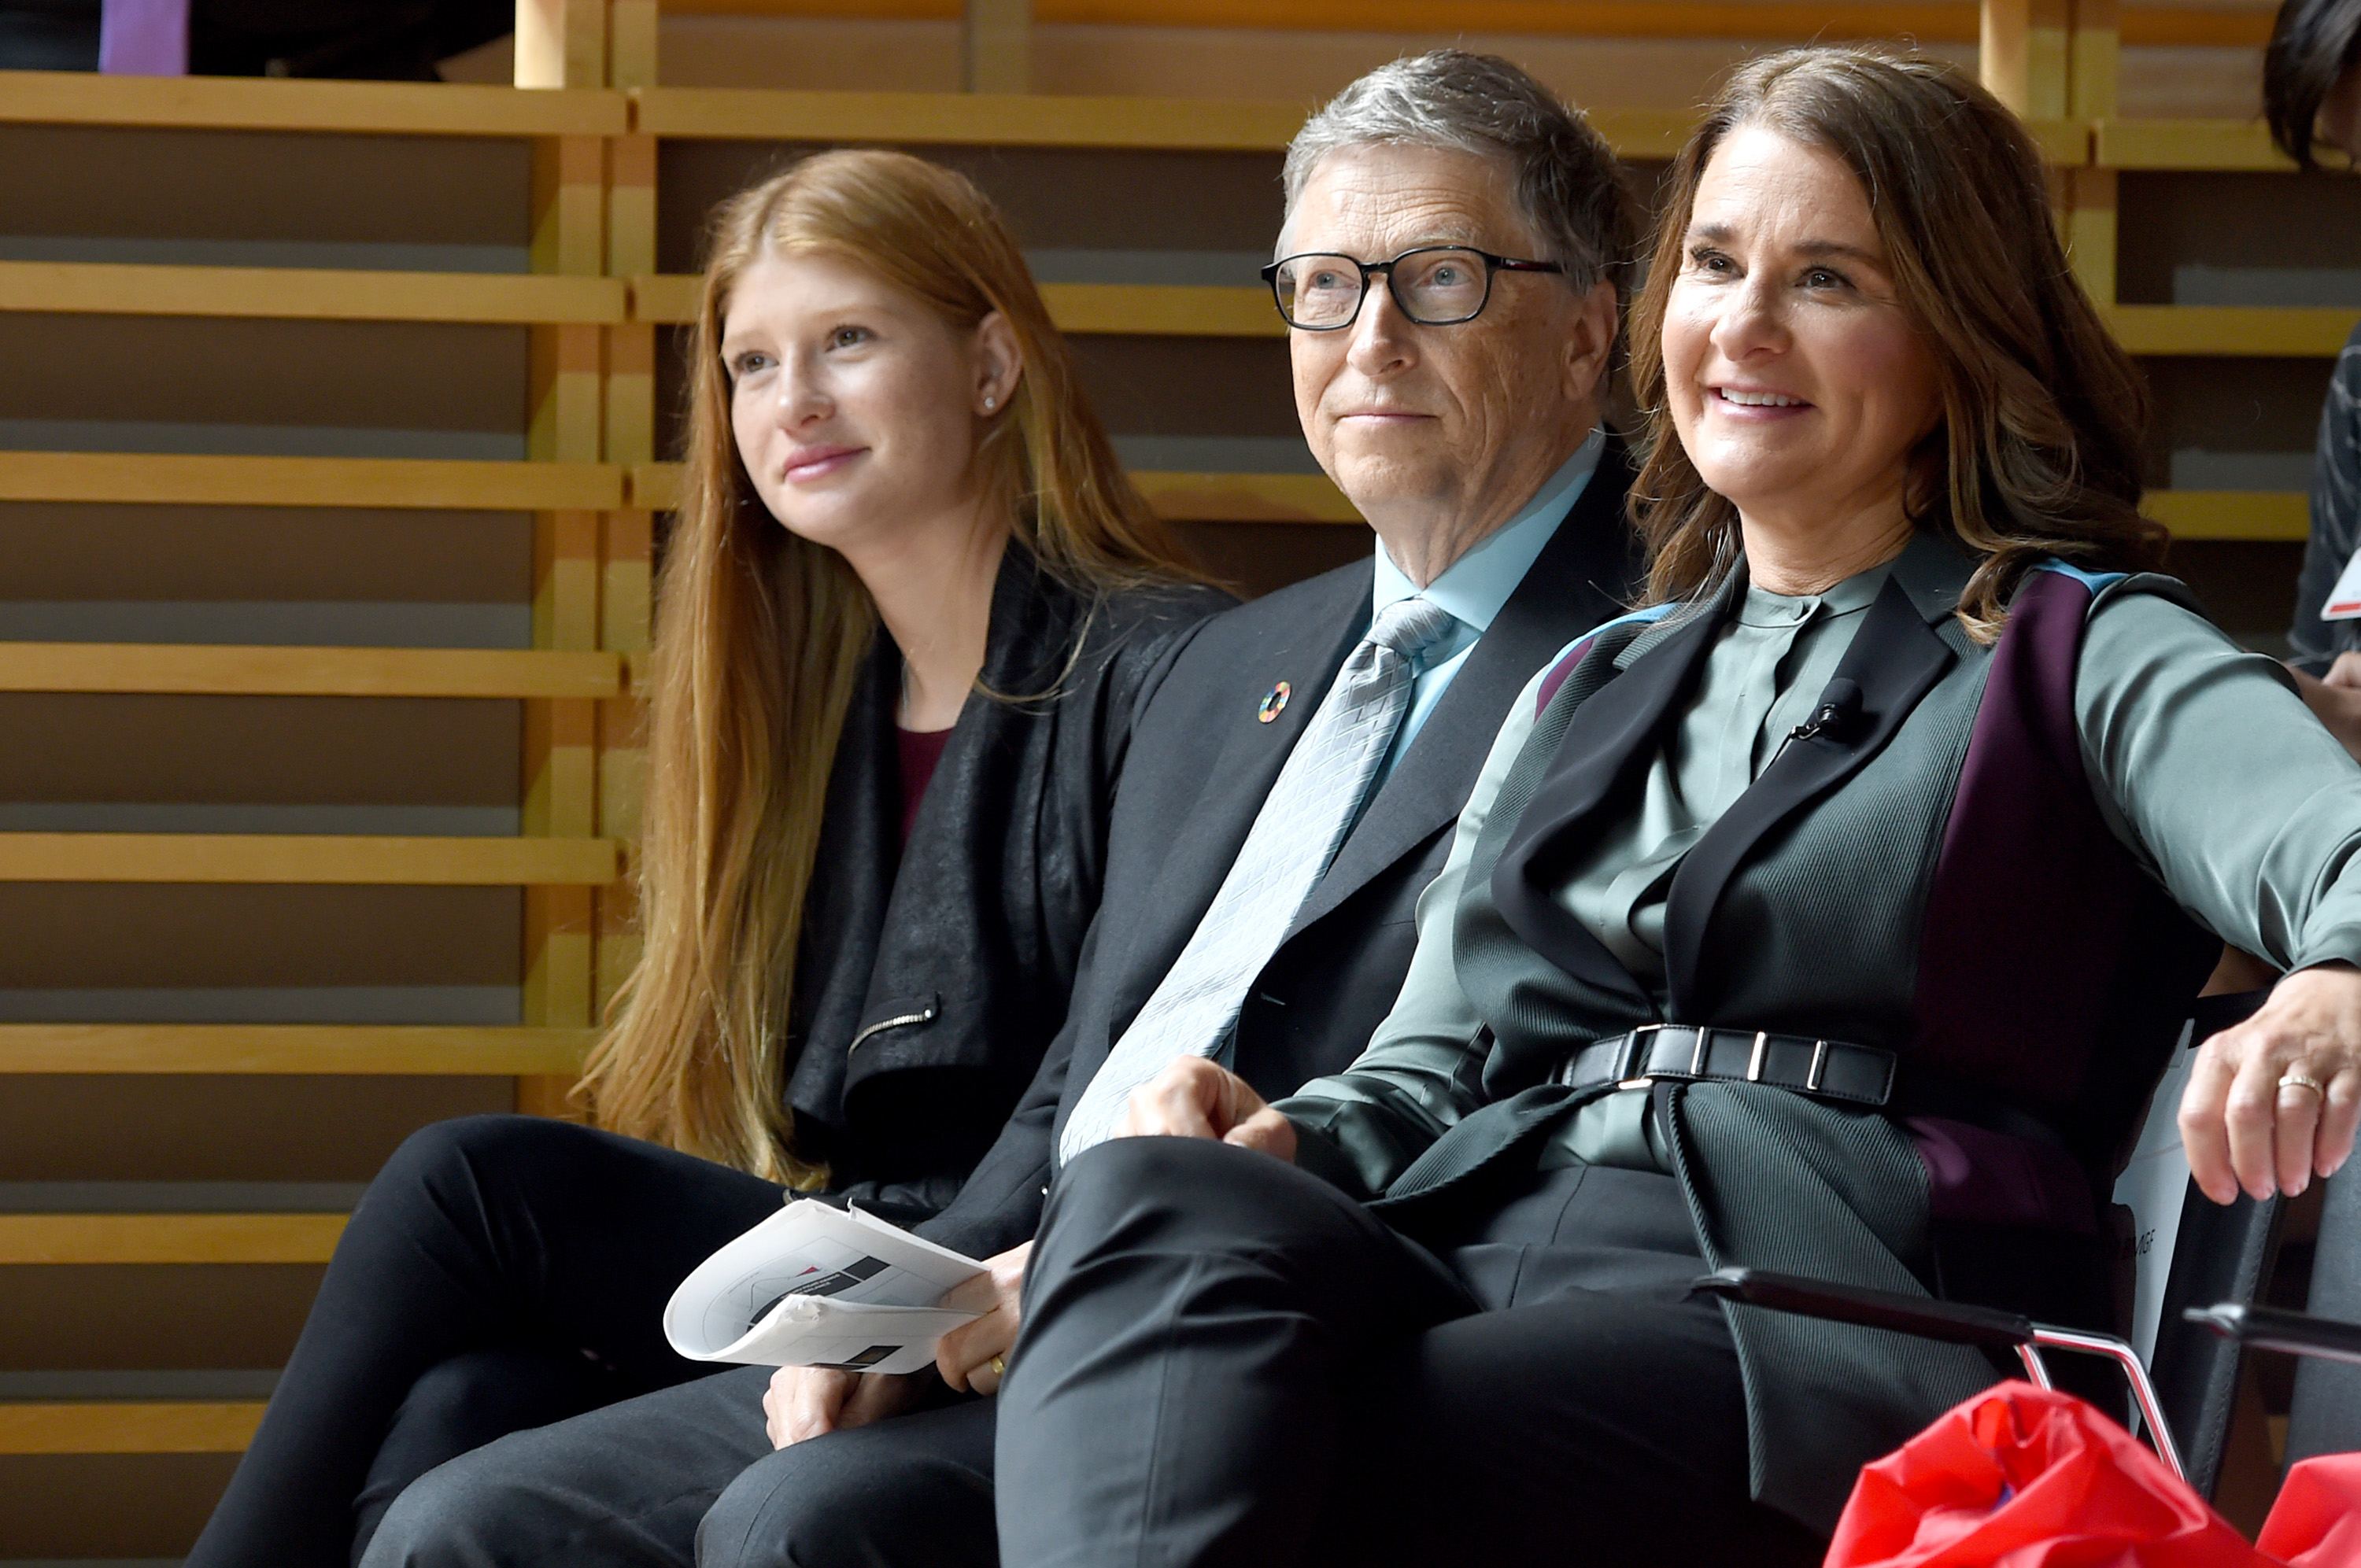 Phoebe Adele Gates, Bill Gates, and Melinda Gates at Lincoln Center on September 20, 2017, in New York City. | Source: Getty Images